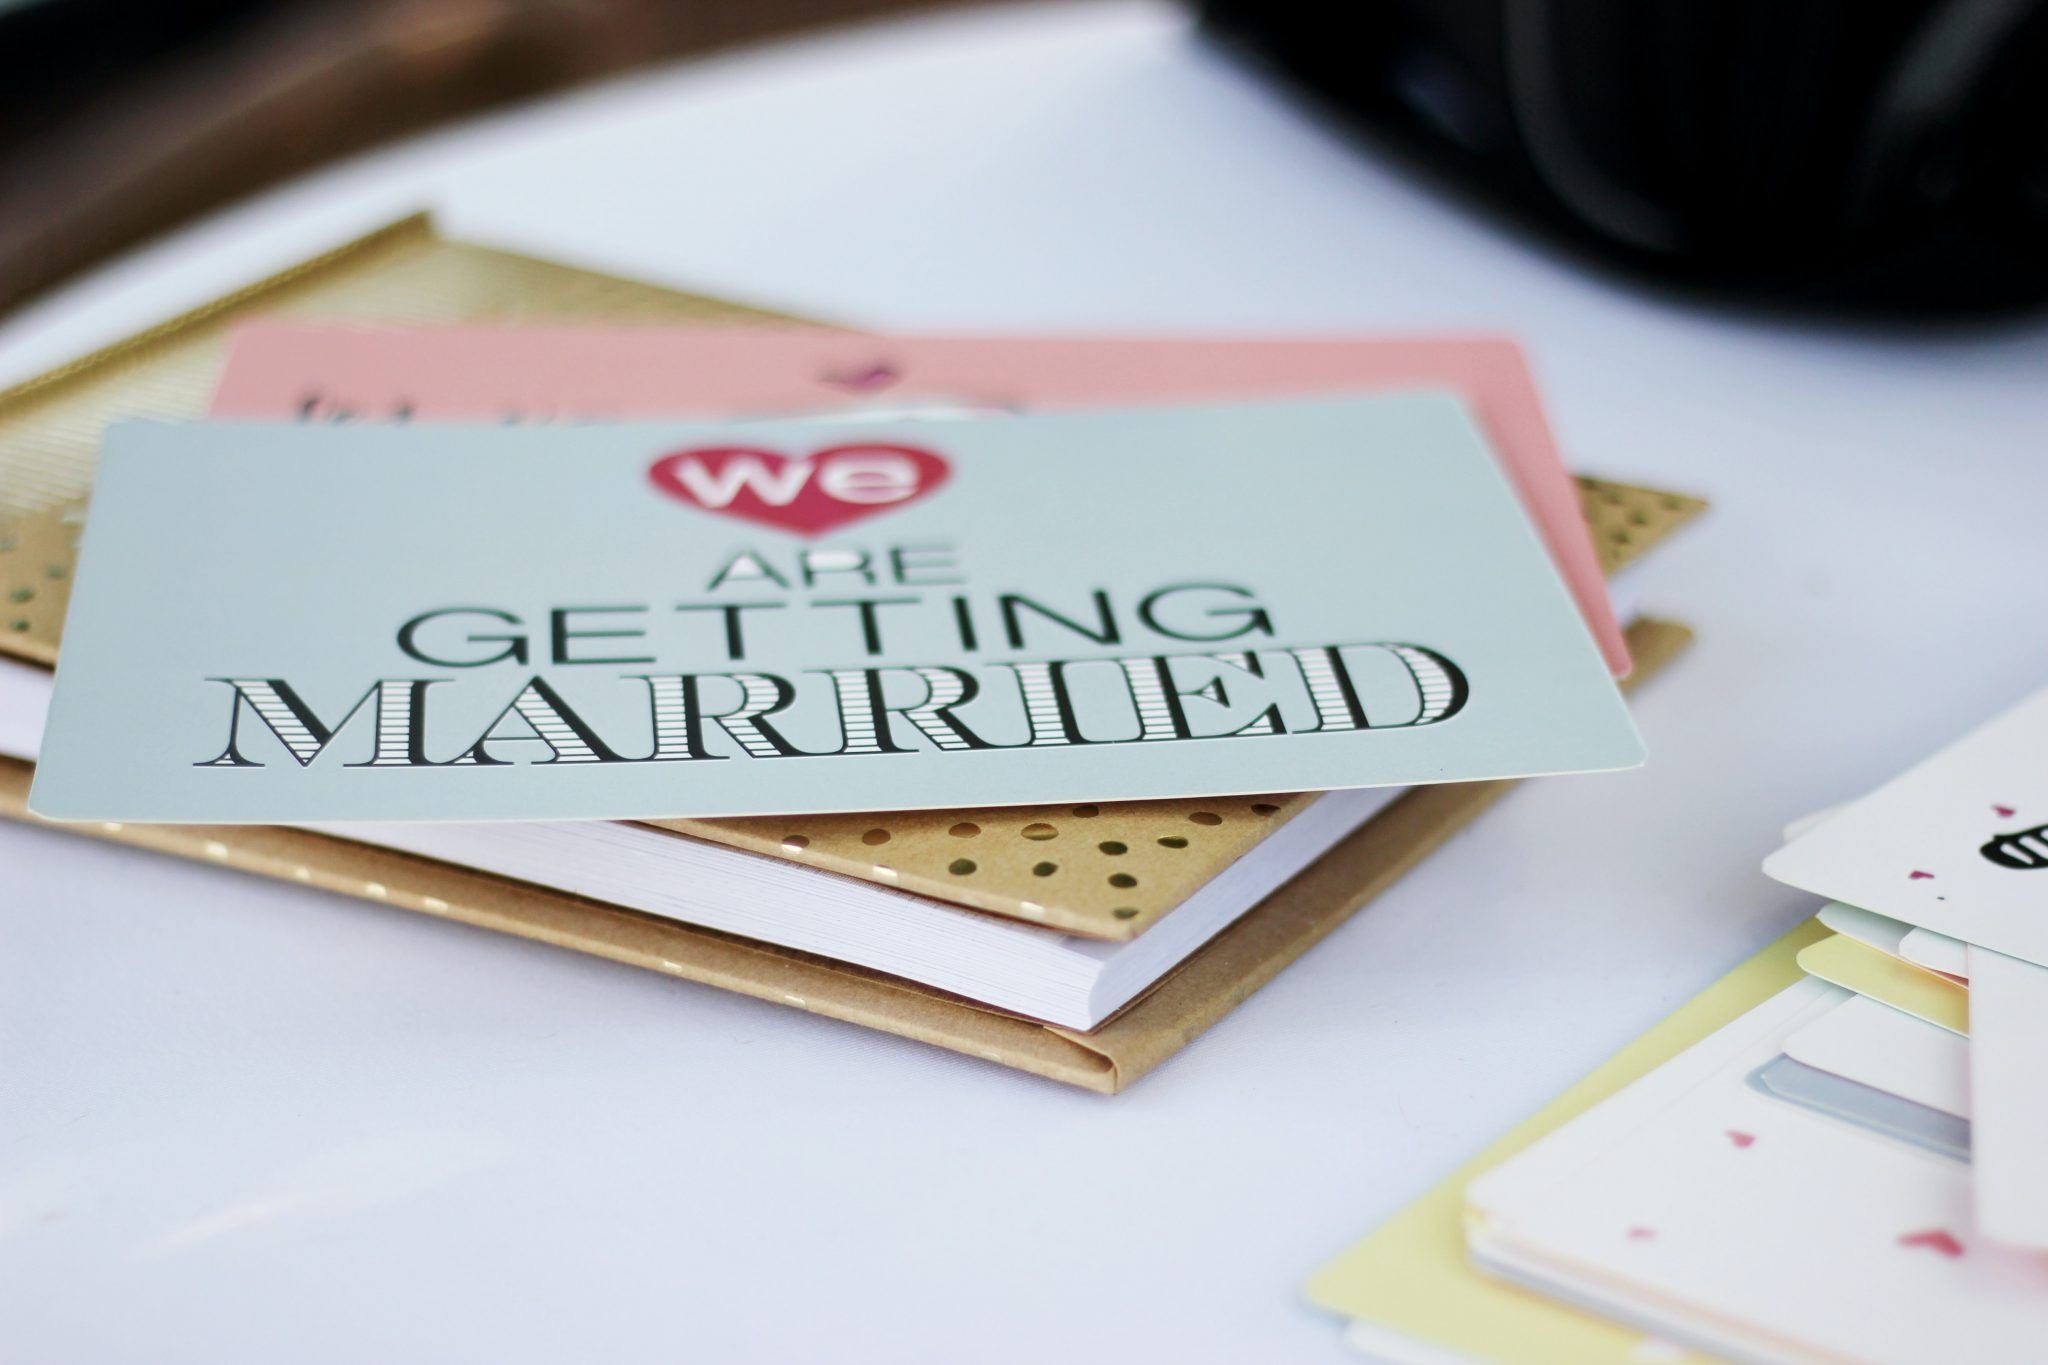 Use Scroll Wedding Cards and celebrate the occasion like the royals